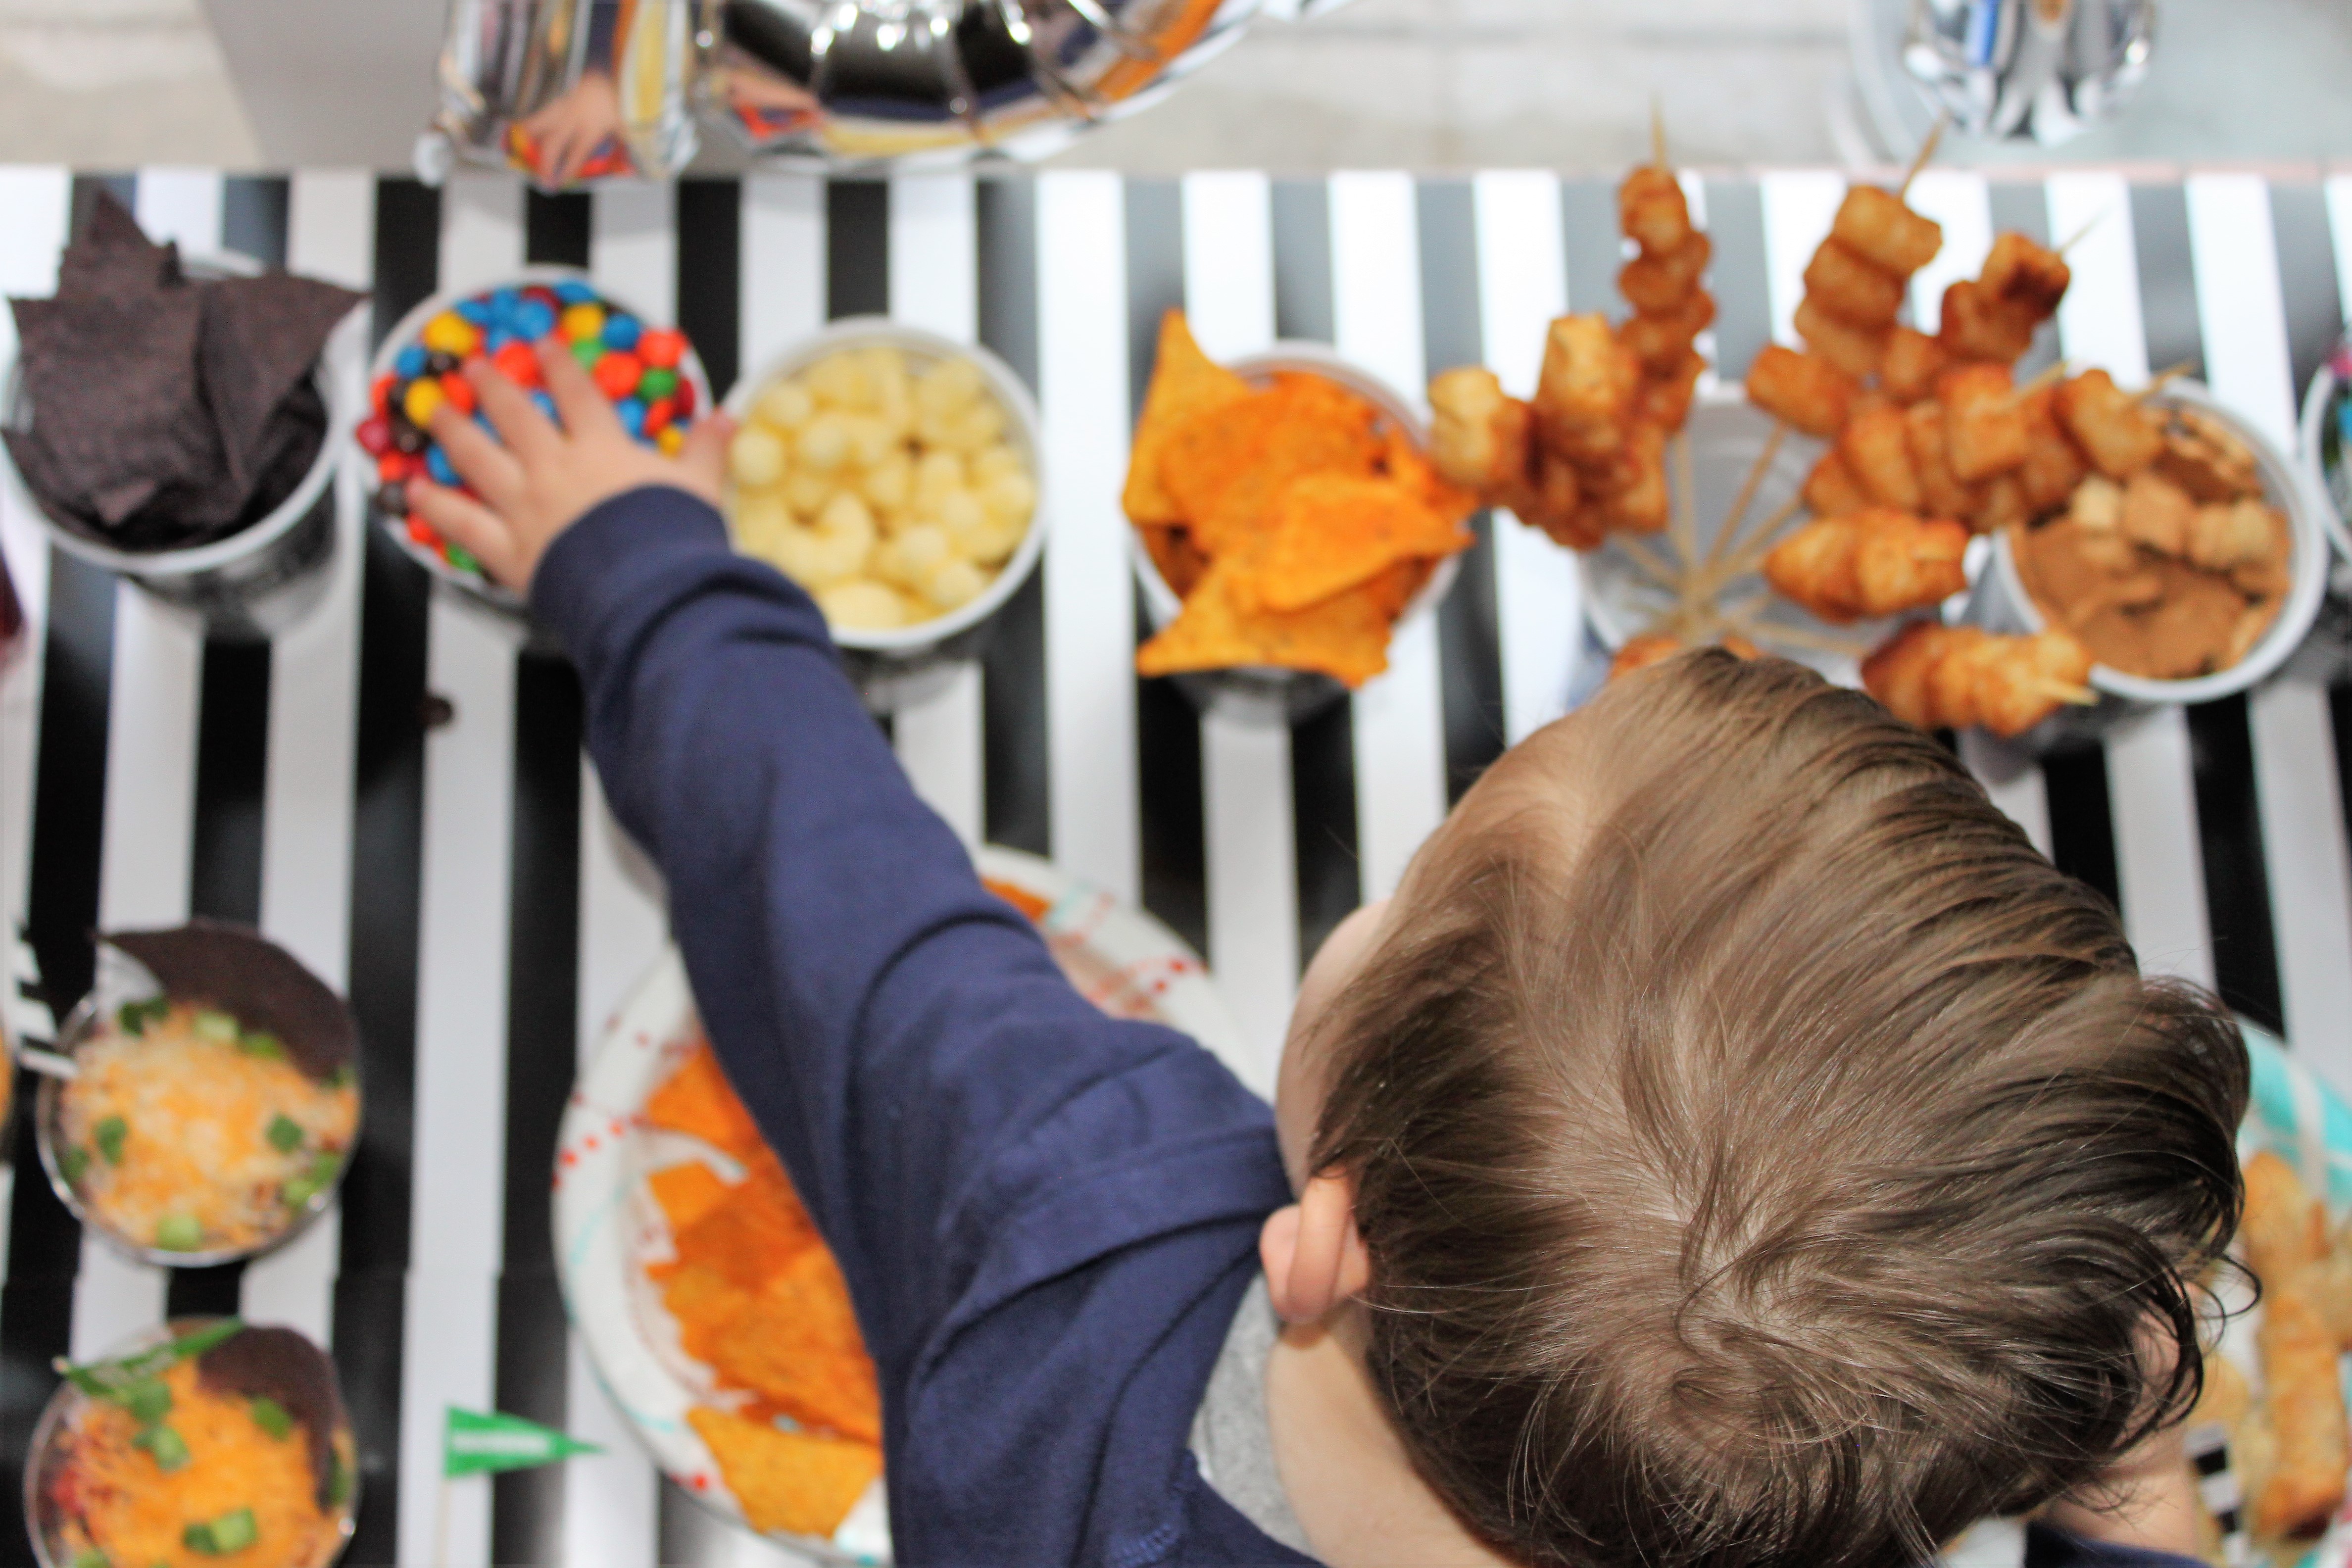 super bowl kid friendly ideas using solo products. Snacks and food